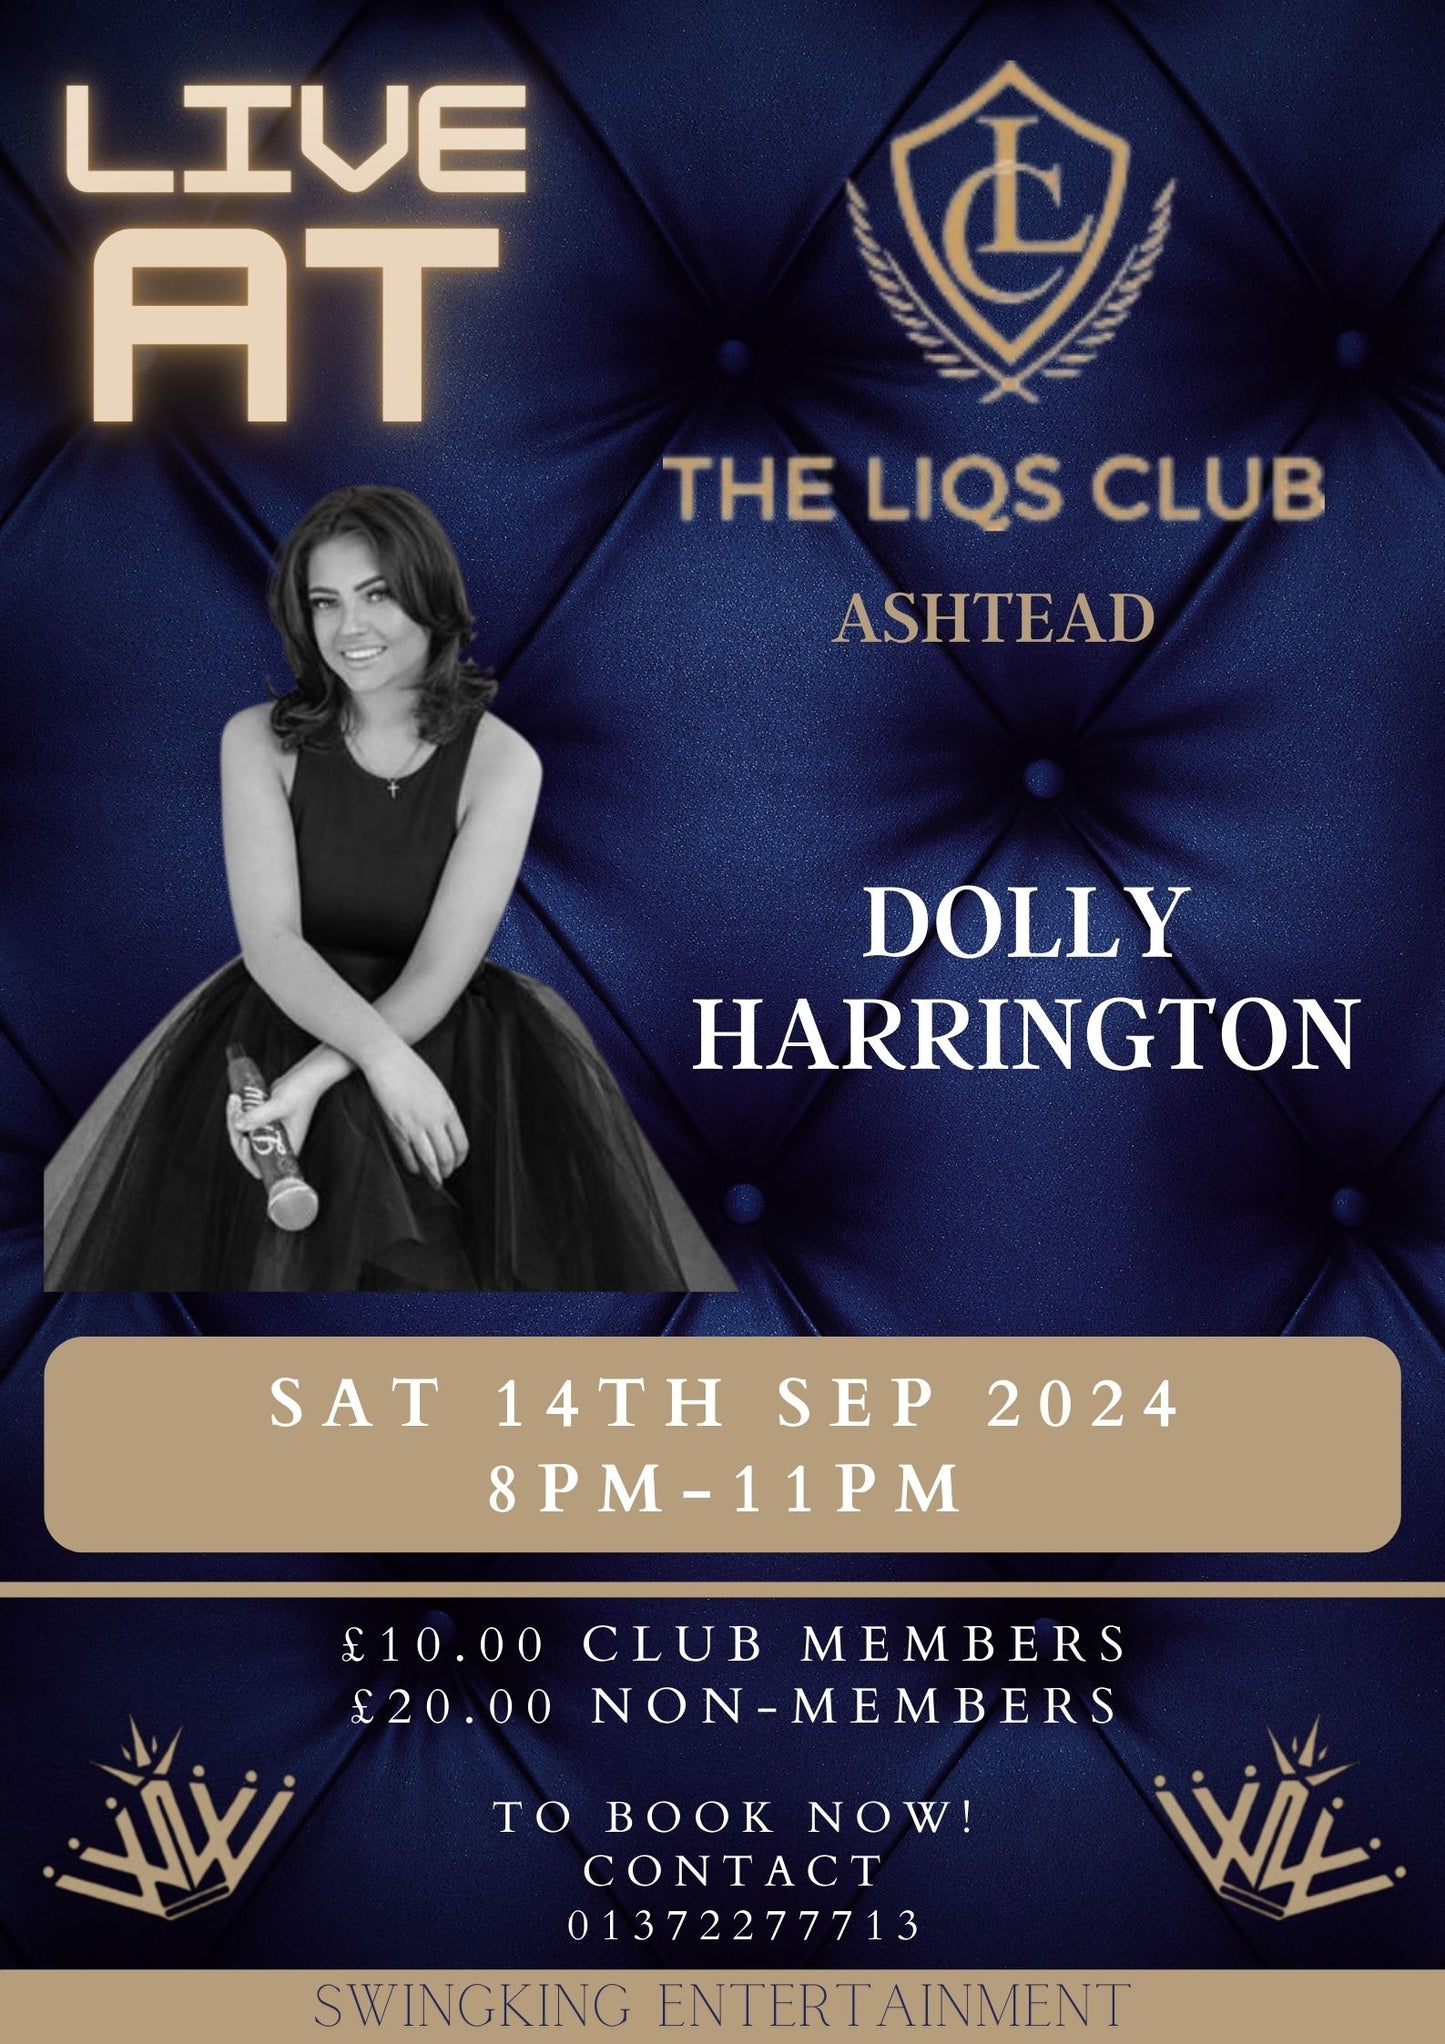 Live Music with Dolly Harrington - Saturday 14th September 2024